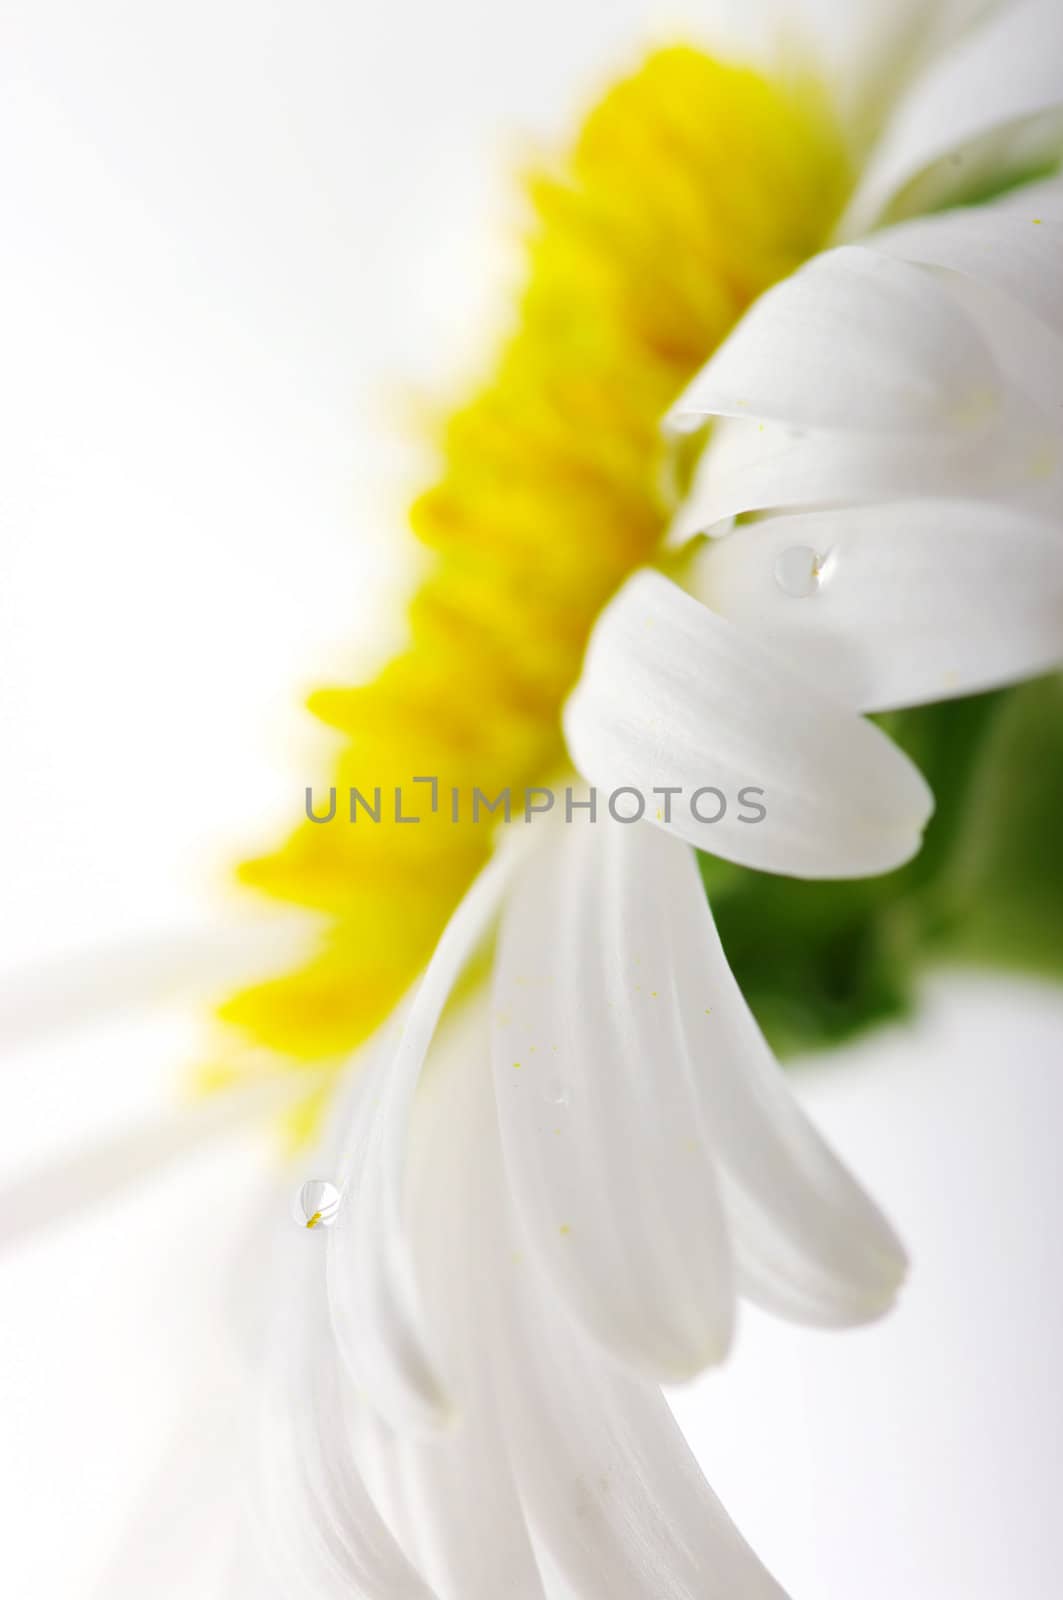 White camomile flower close-up against white background. Focun on the water drop.